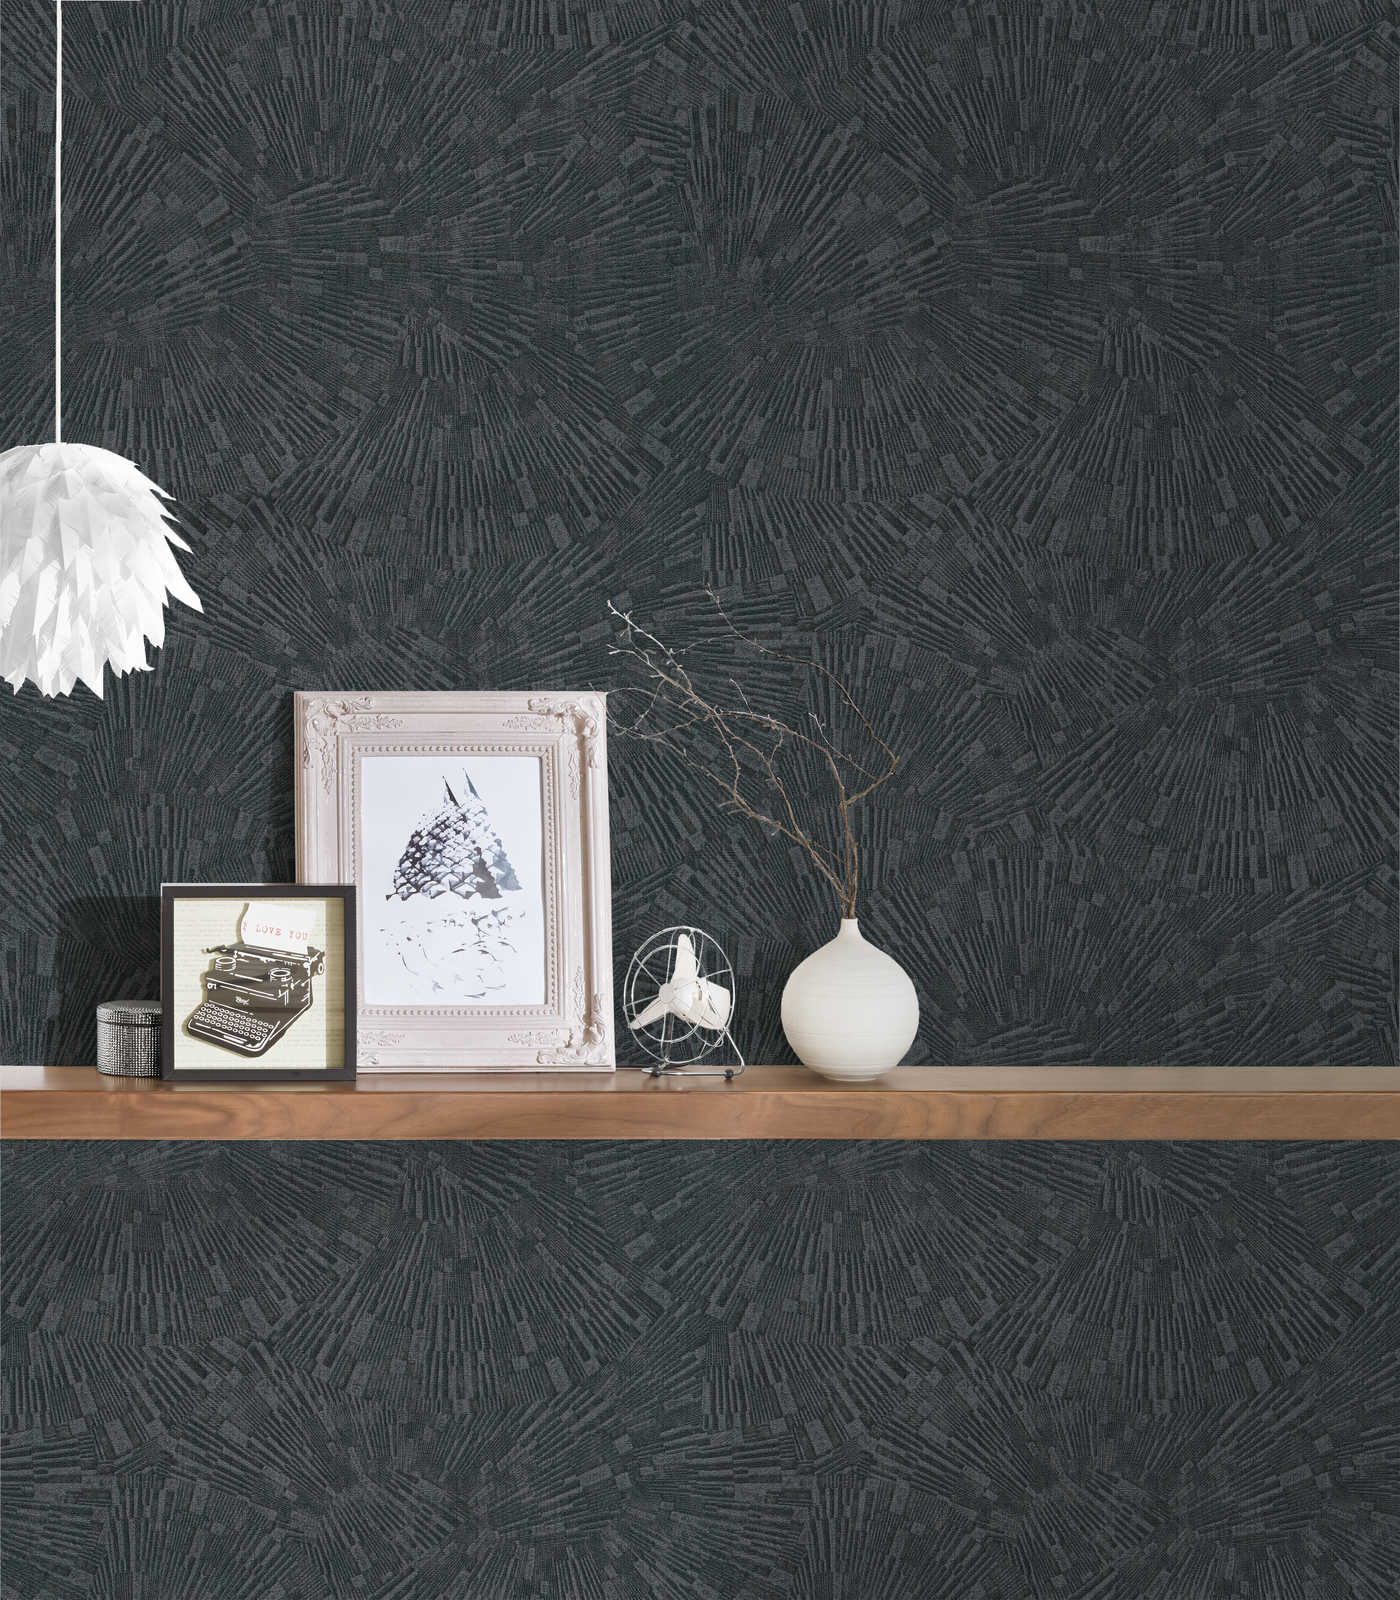             Black wallpaper glossy with texture effect - brown, black
        